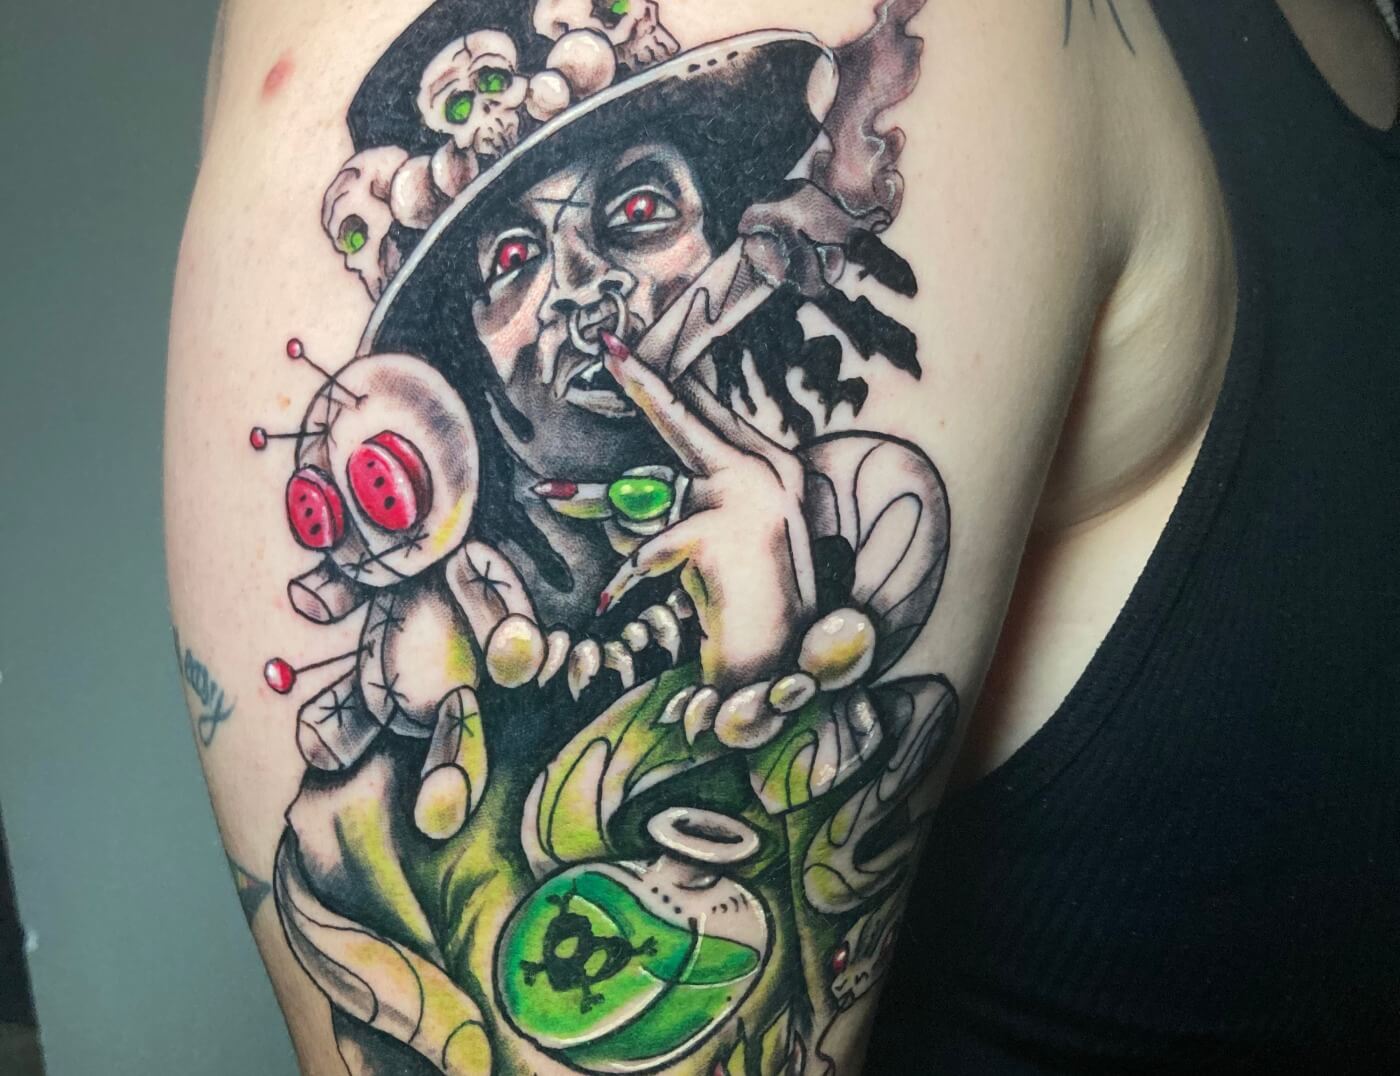 Papa Legba Tattoo By Funk Tha World At Iron Palm Tattoos. A prominent figure in Hattian and Louisiana Voodoo, Papa Legba is considered to be a gatekeeper between the living and spiritual realms...And one of the scariest figures in the voodoo and Cajun culture. Call 404-973-7828 or stop by for a free consultation. Walk Ins are welcome.